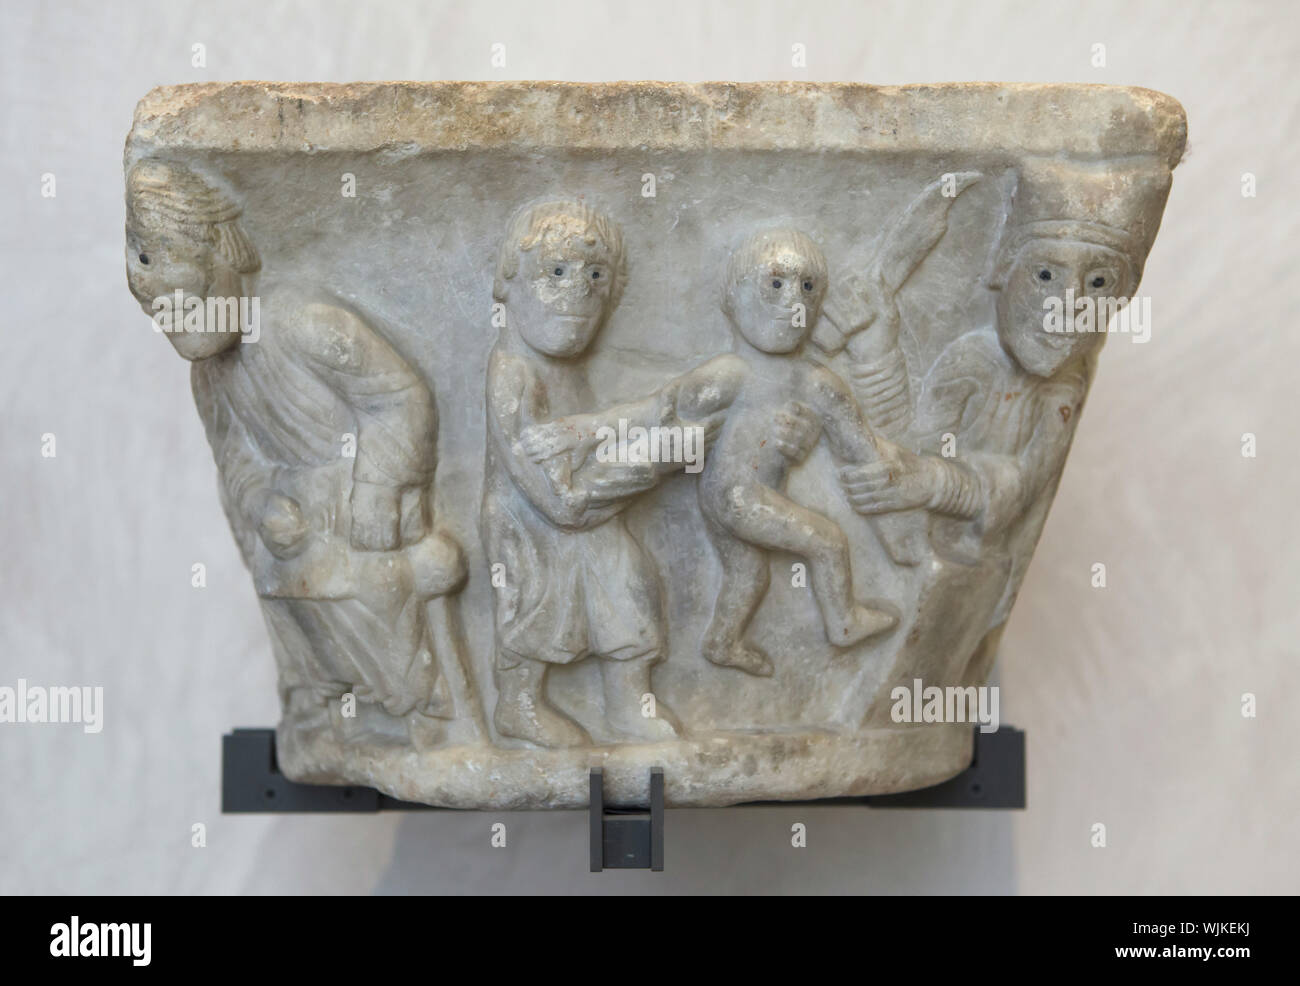 Massacre of the Innocents depicted in the Romanesque marble capital from Northern Italy dated from the 12th century on display in the Museum of Fine Arts (Musée des Beaux-Arts de Lyon) in Lyon, France. Stock Photo